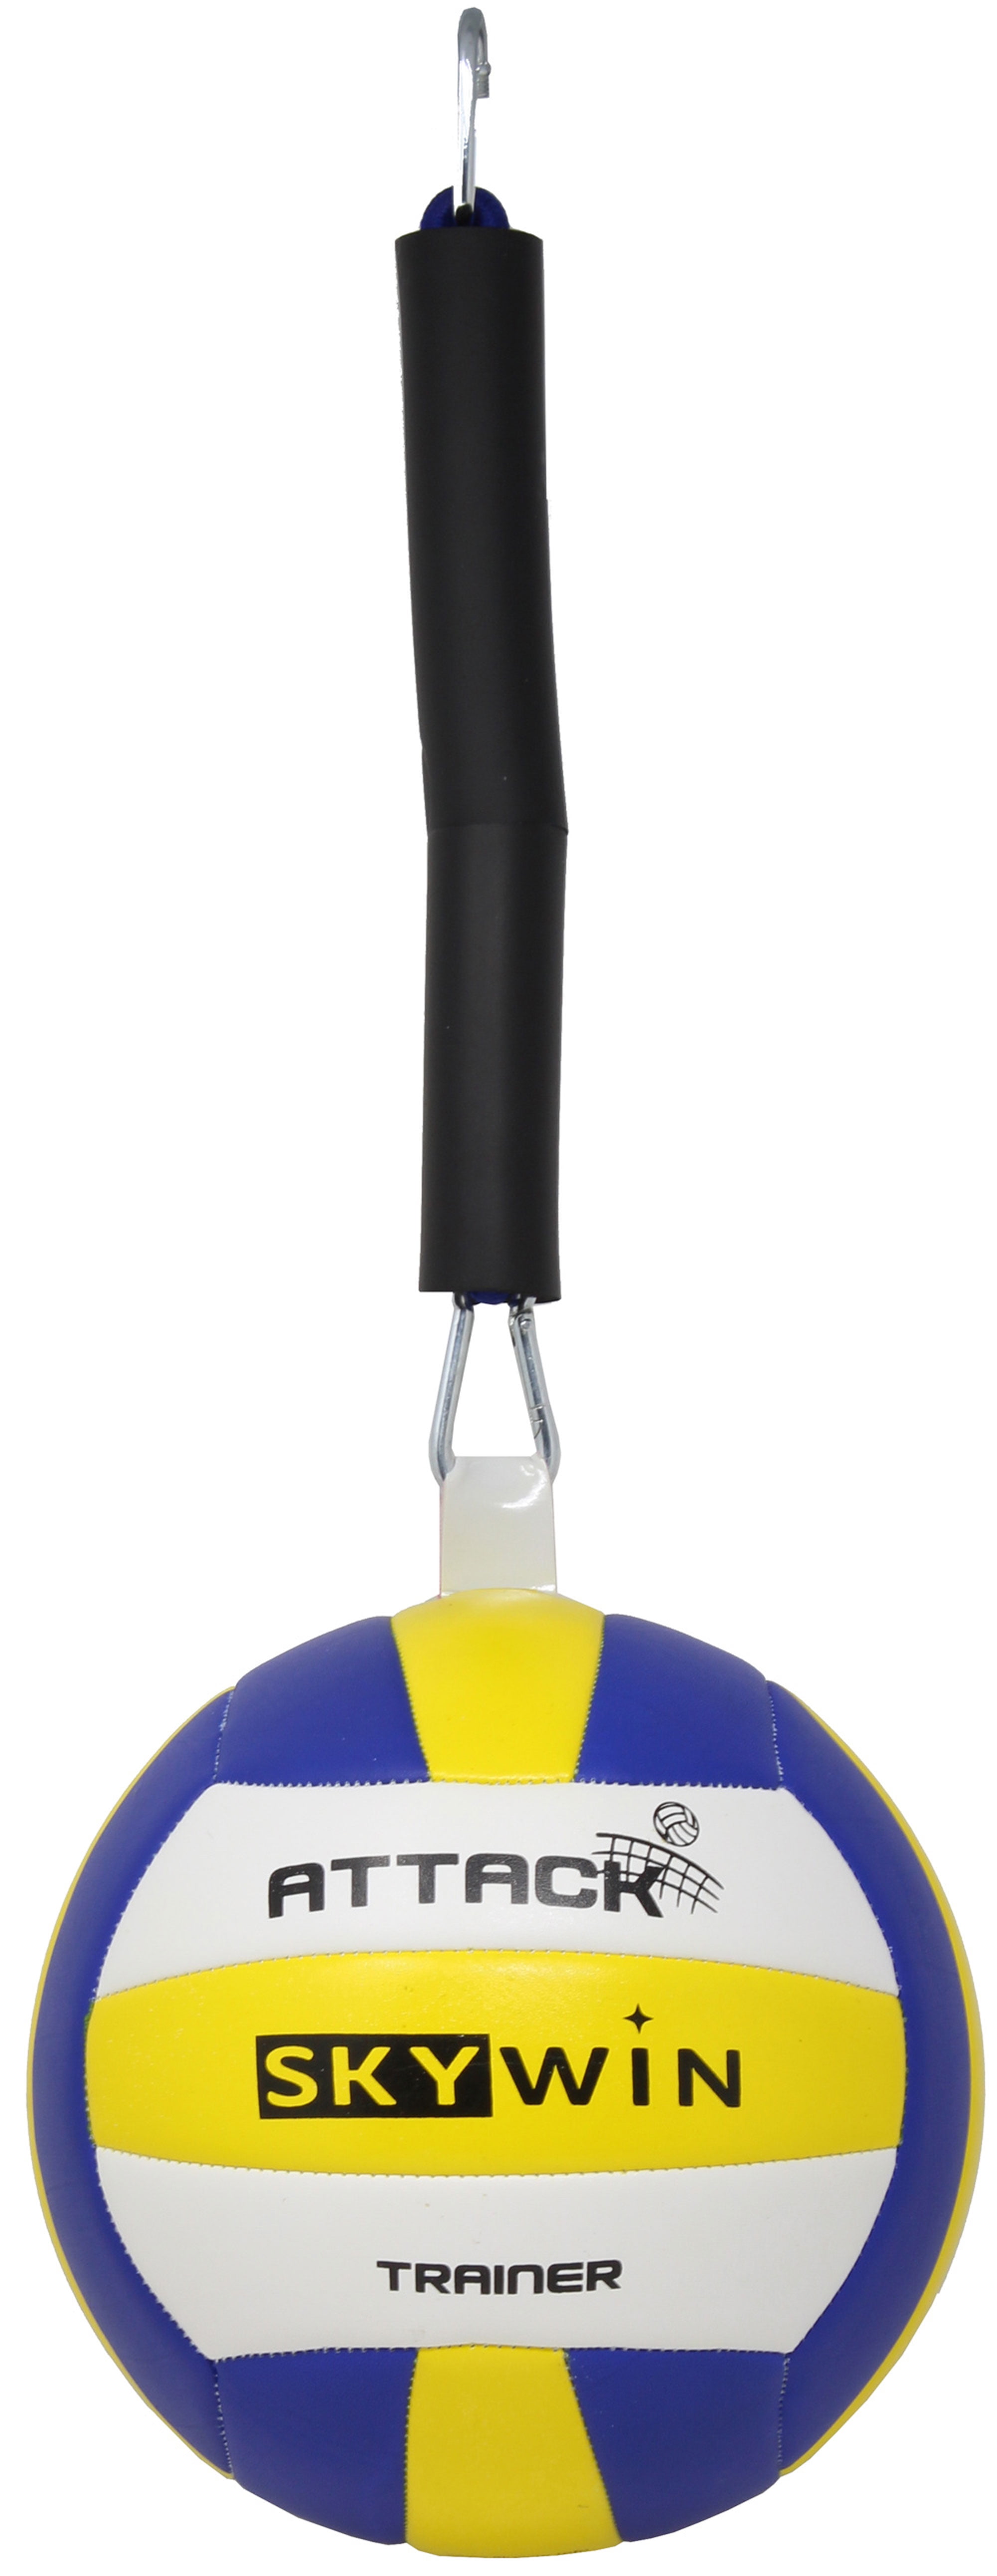 Arm Swings Volleyball Equipment Training Improves Serving Excellent Volleyball Training Aids Towards Epertise and Spiking Power Skywin Volleyball Spike Trainer 